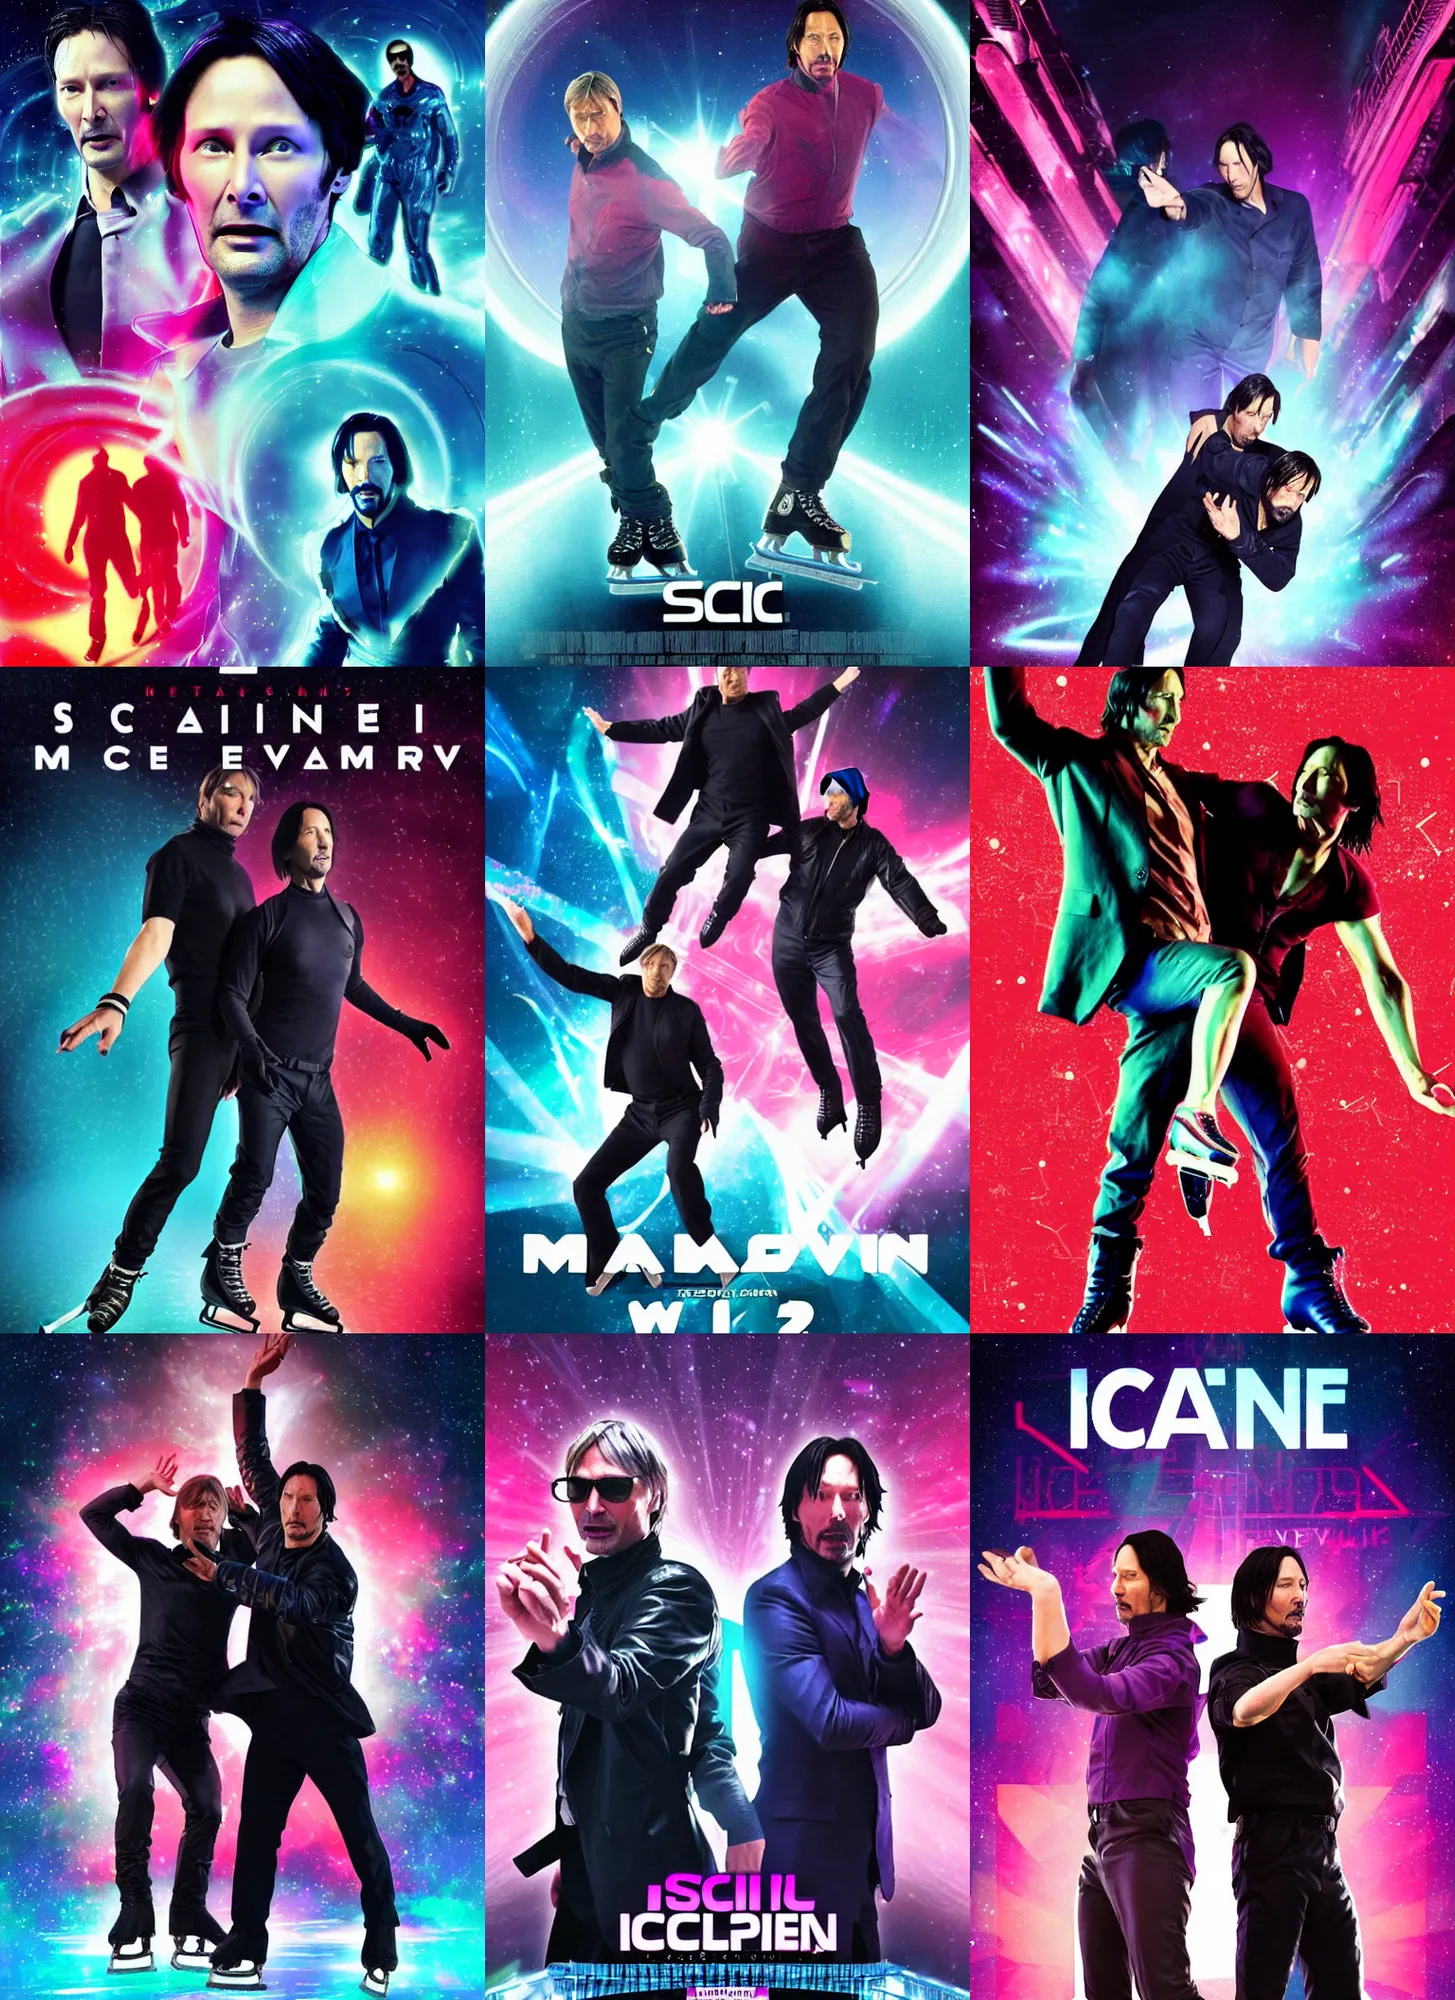 Prompt: sci-fi movie poster with Mads Mikkelsen and Keanu Reeves doing an iceskate choreography with each other, vaporwave style